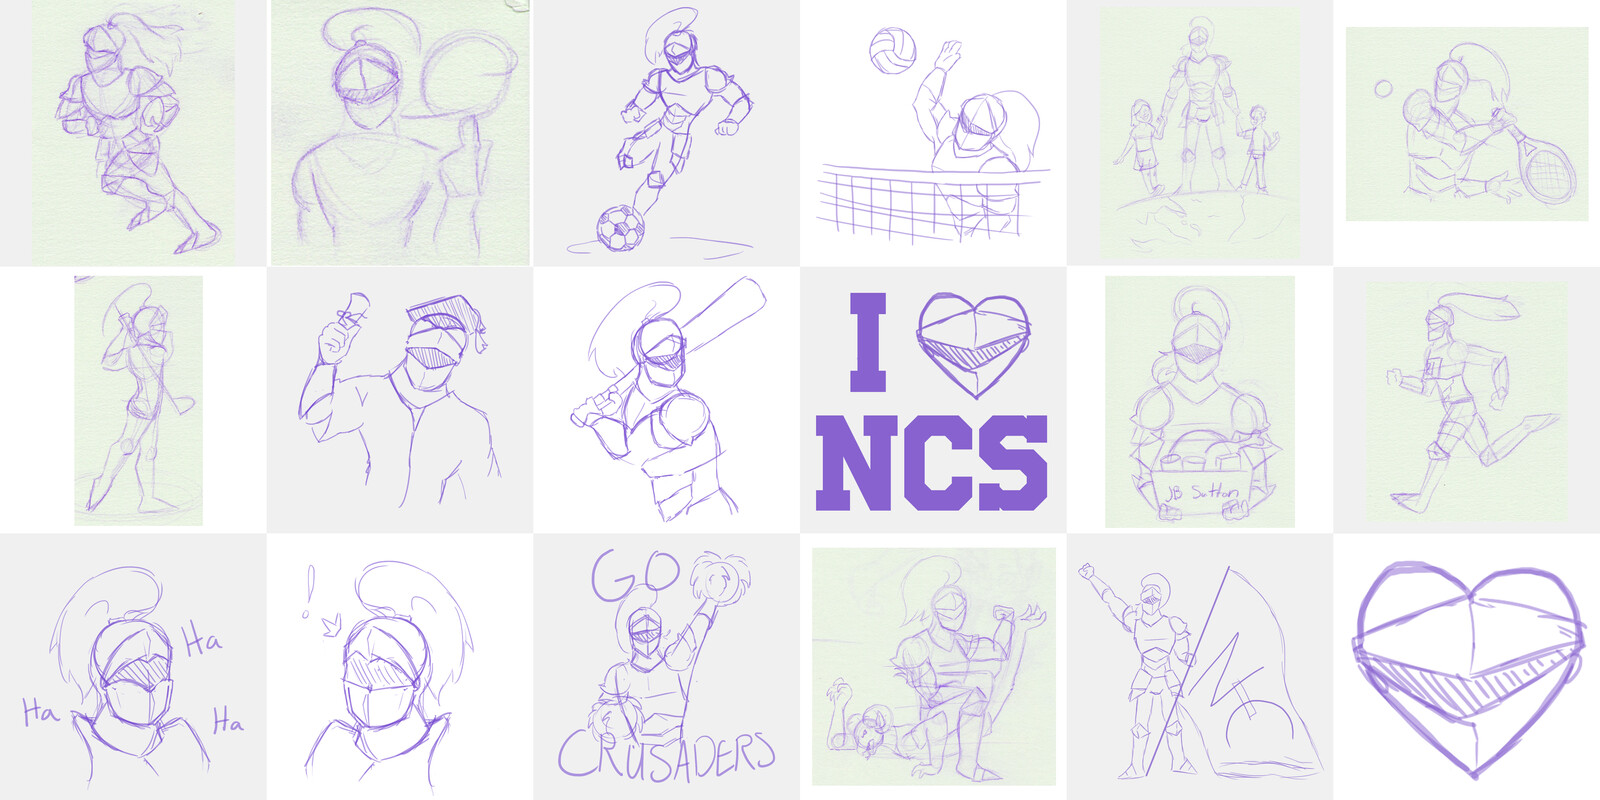 Sketch process. Not all of these made it into the final app.